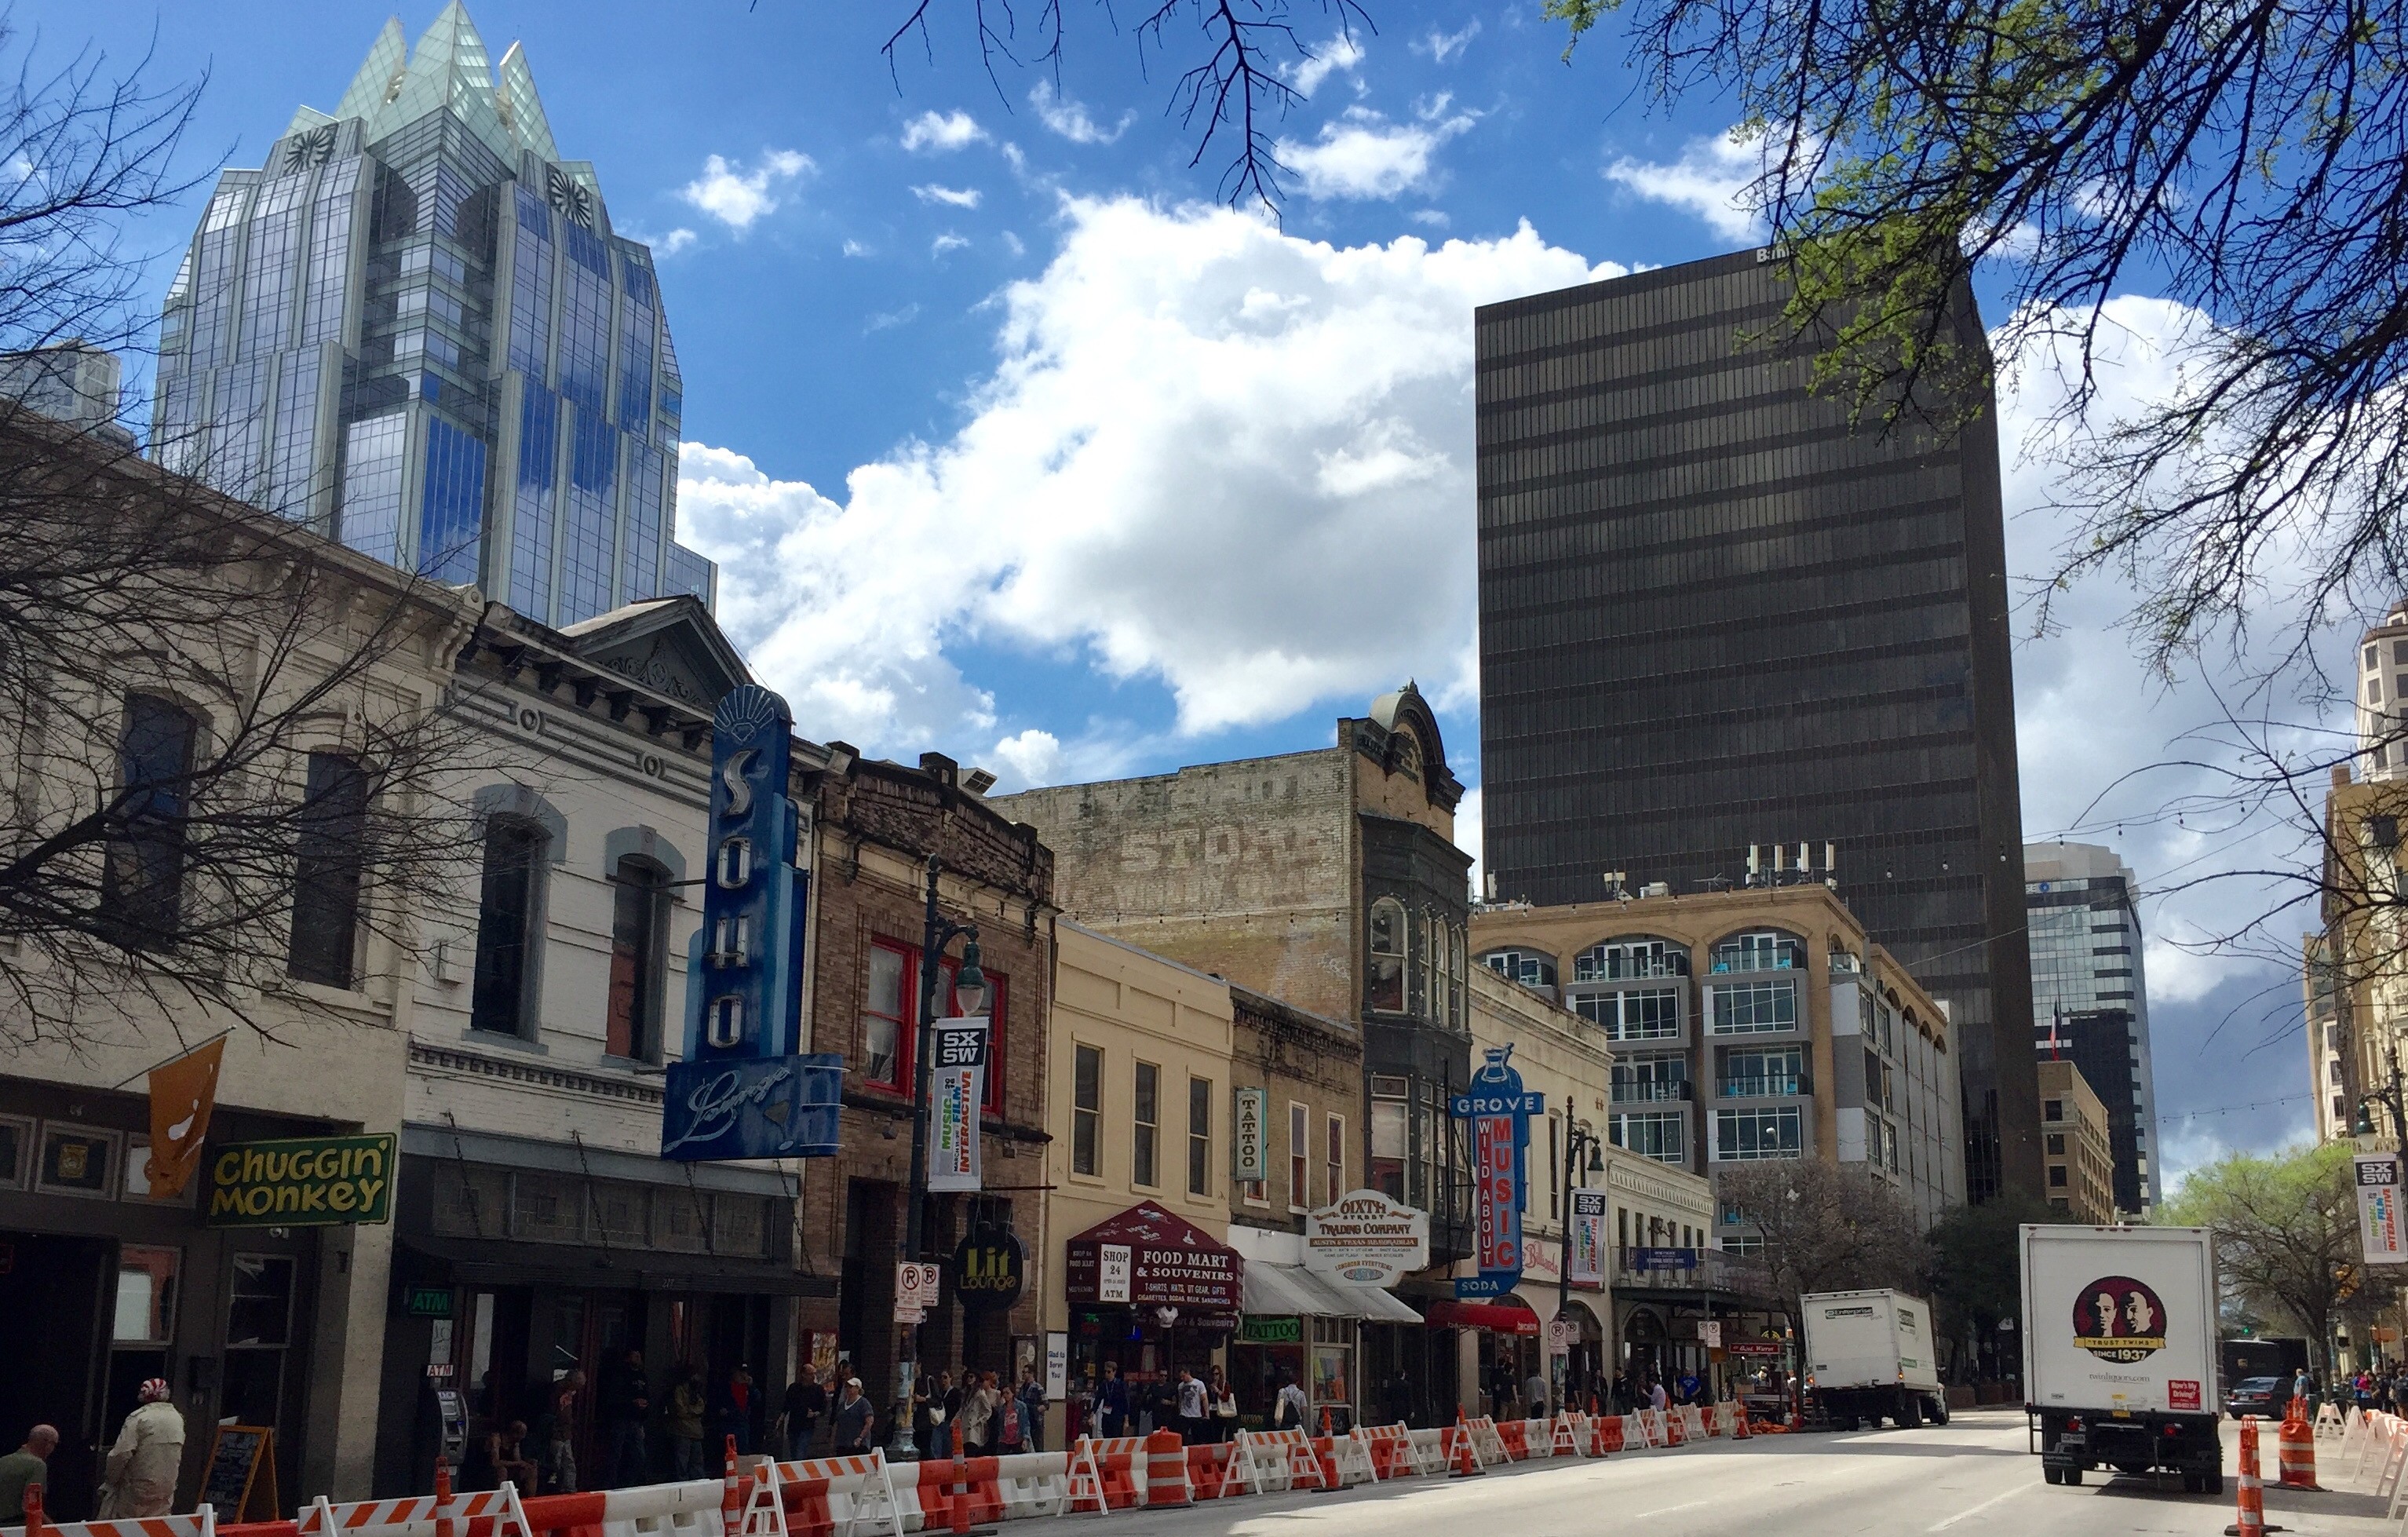 From Here To There: Austin, Texas For SXSW